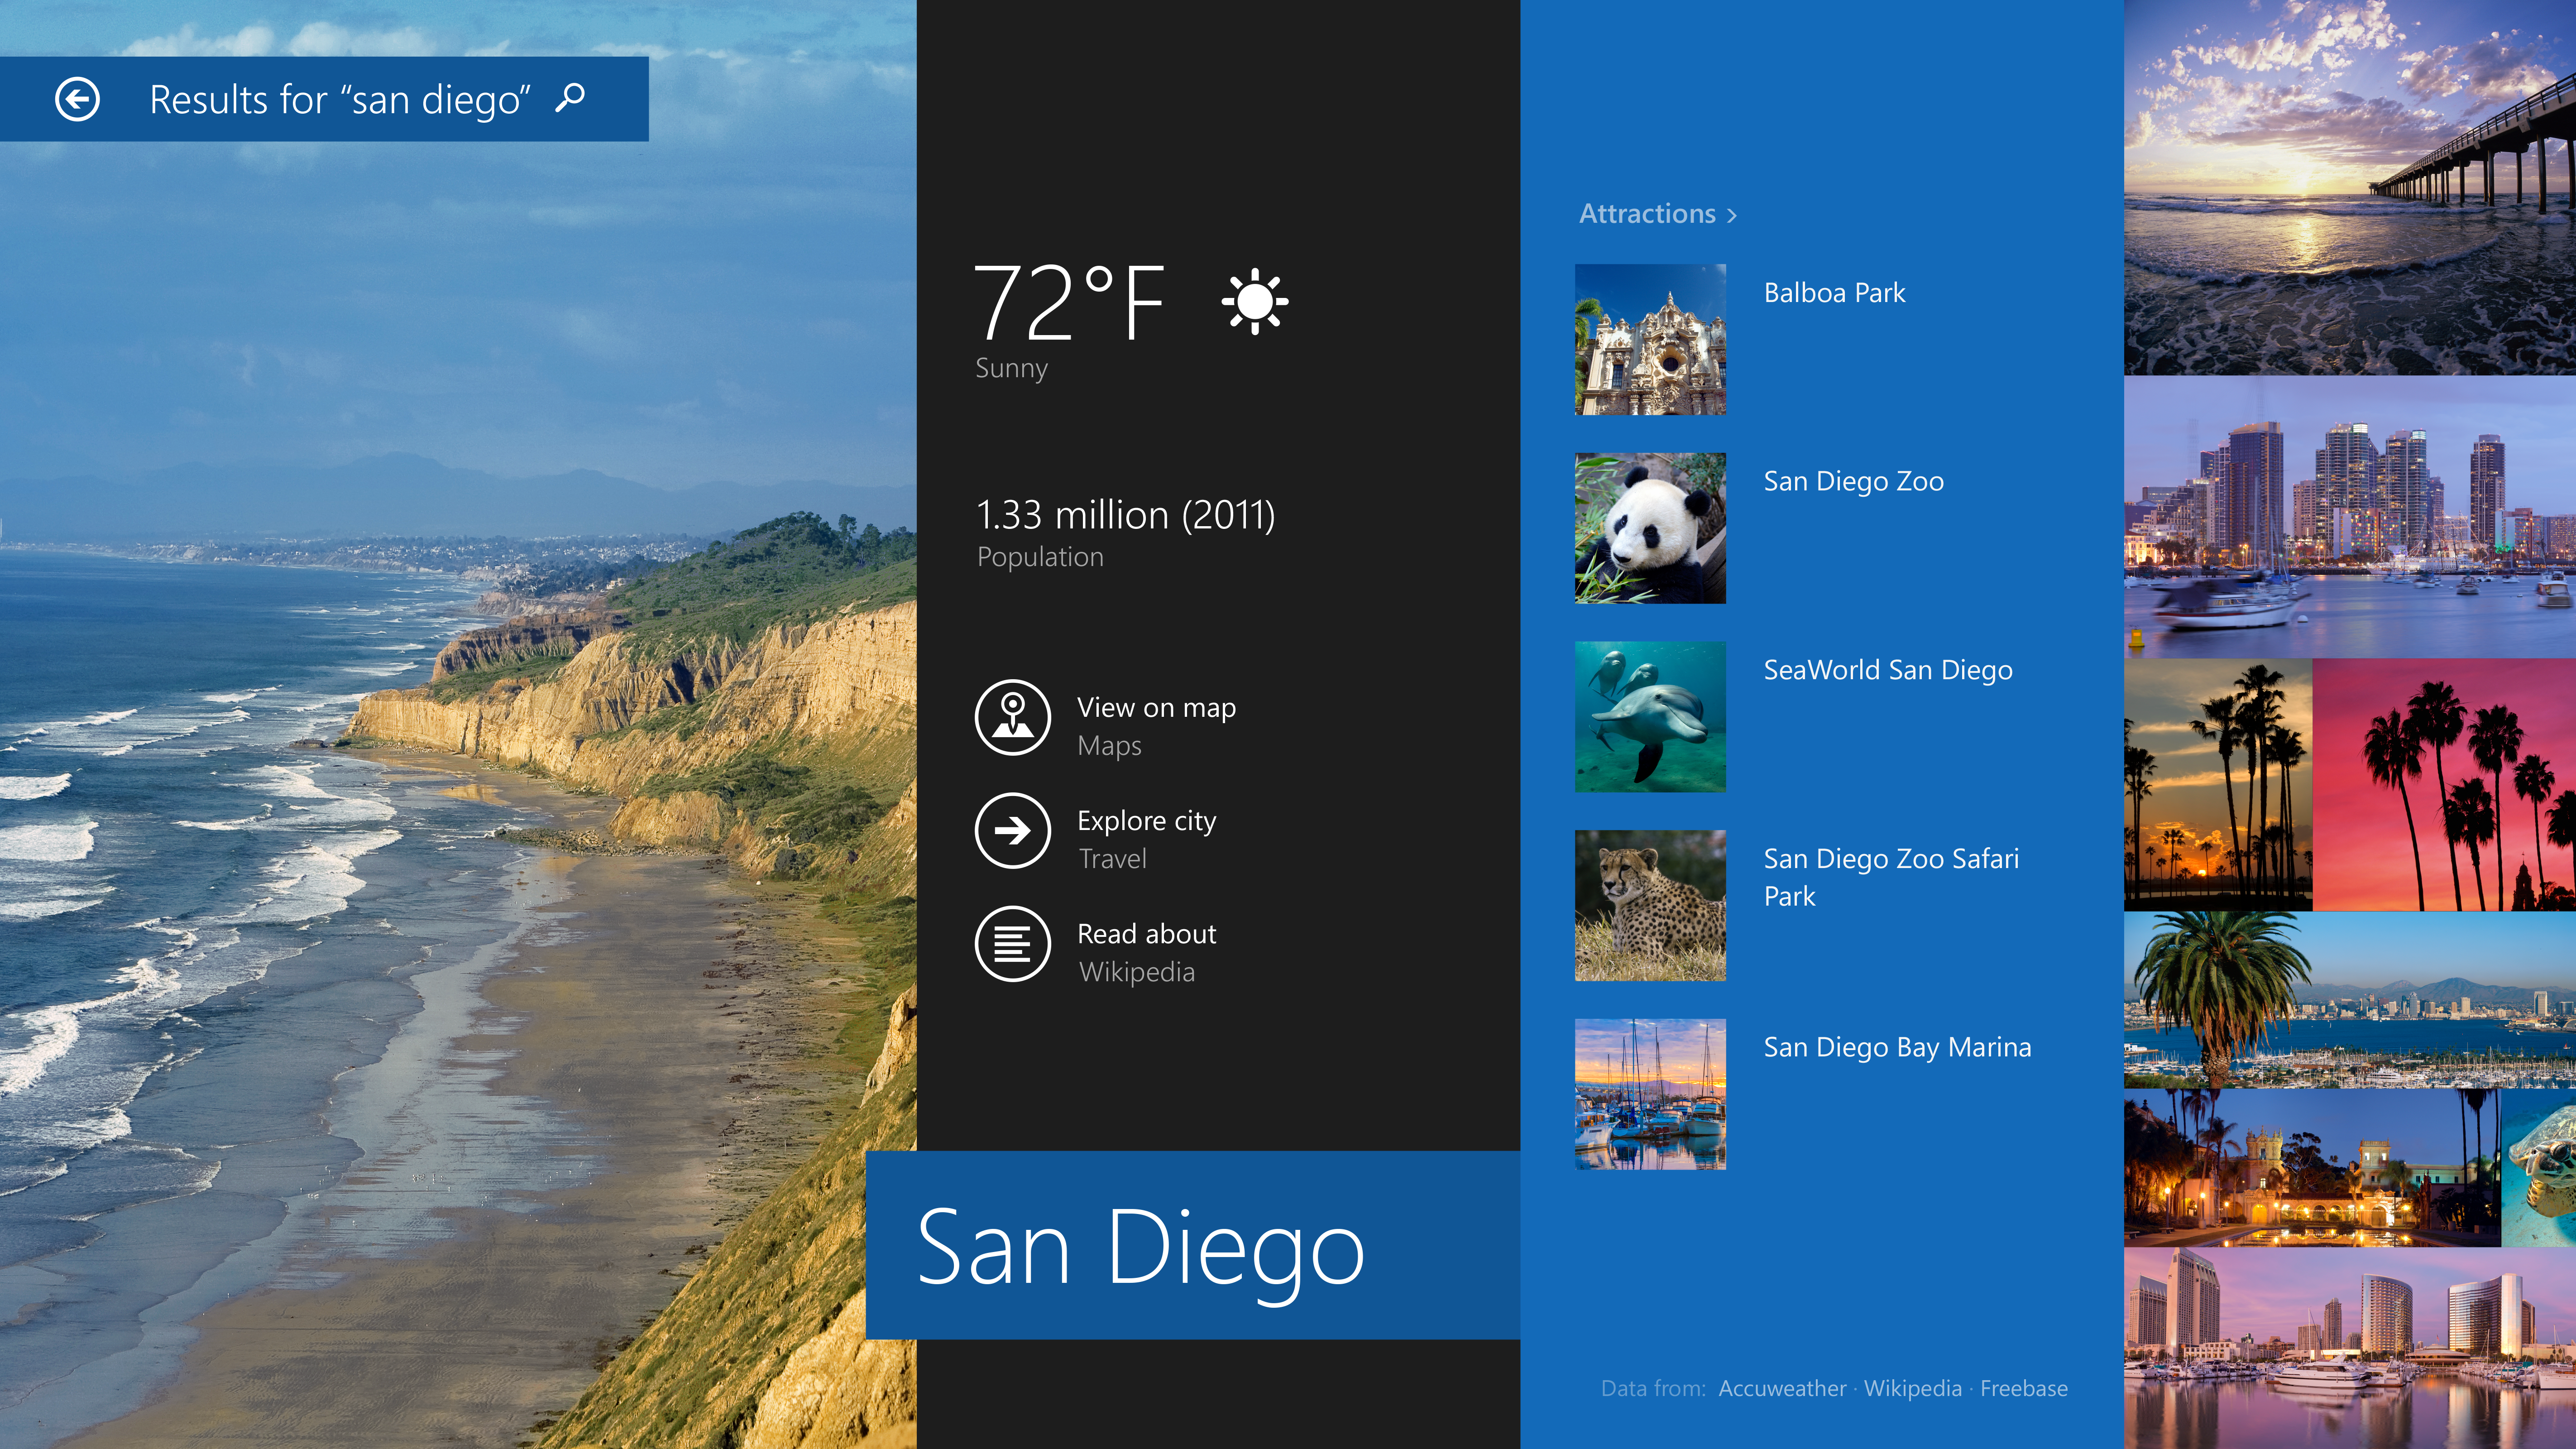 Layouts In The Travel App And Others Are One Benefit Of Windows